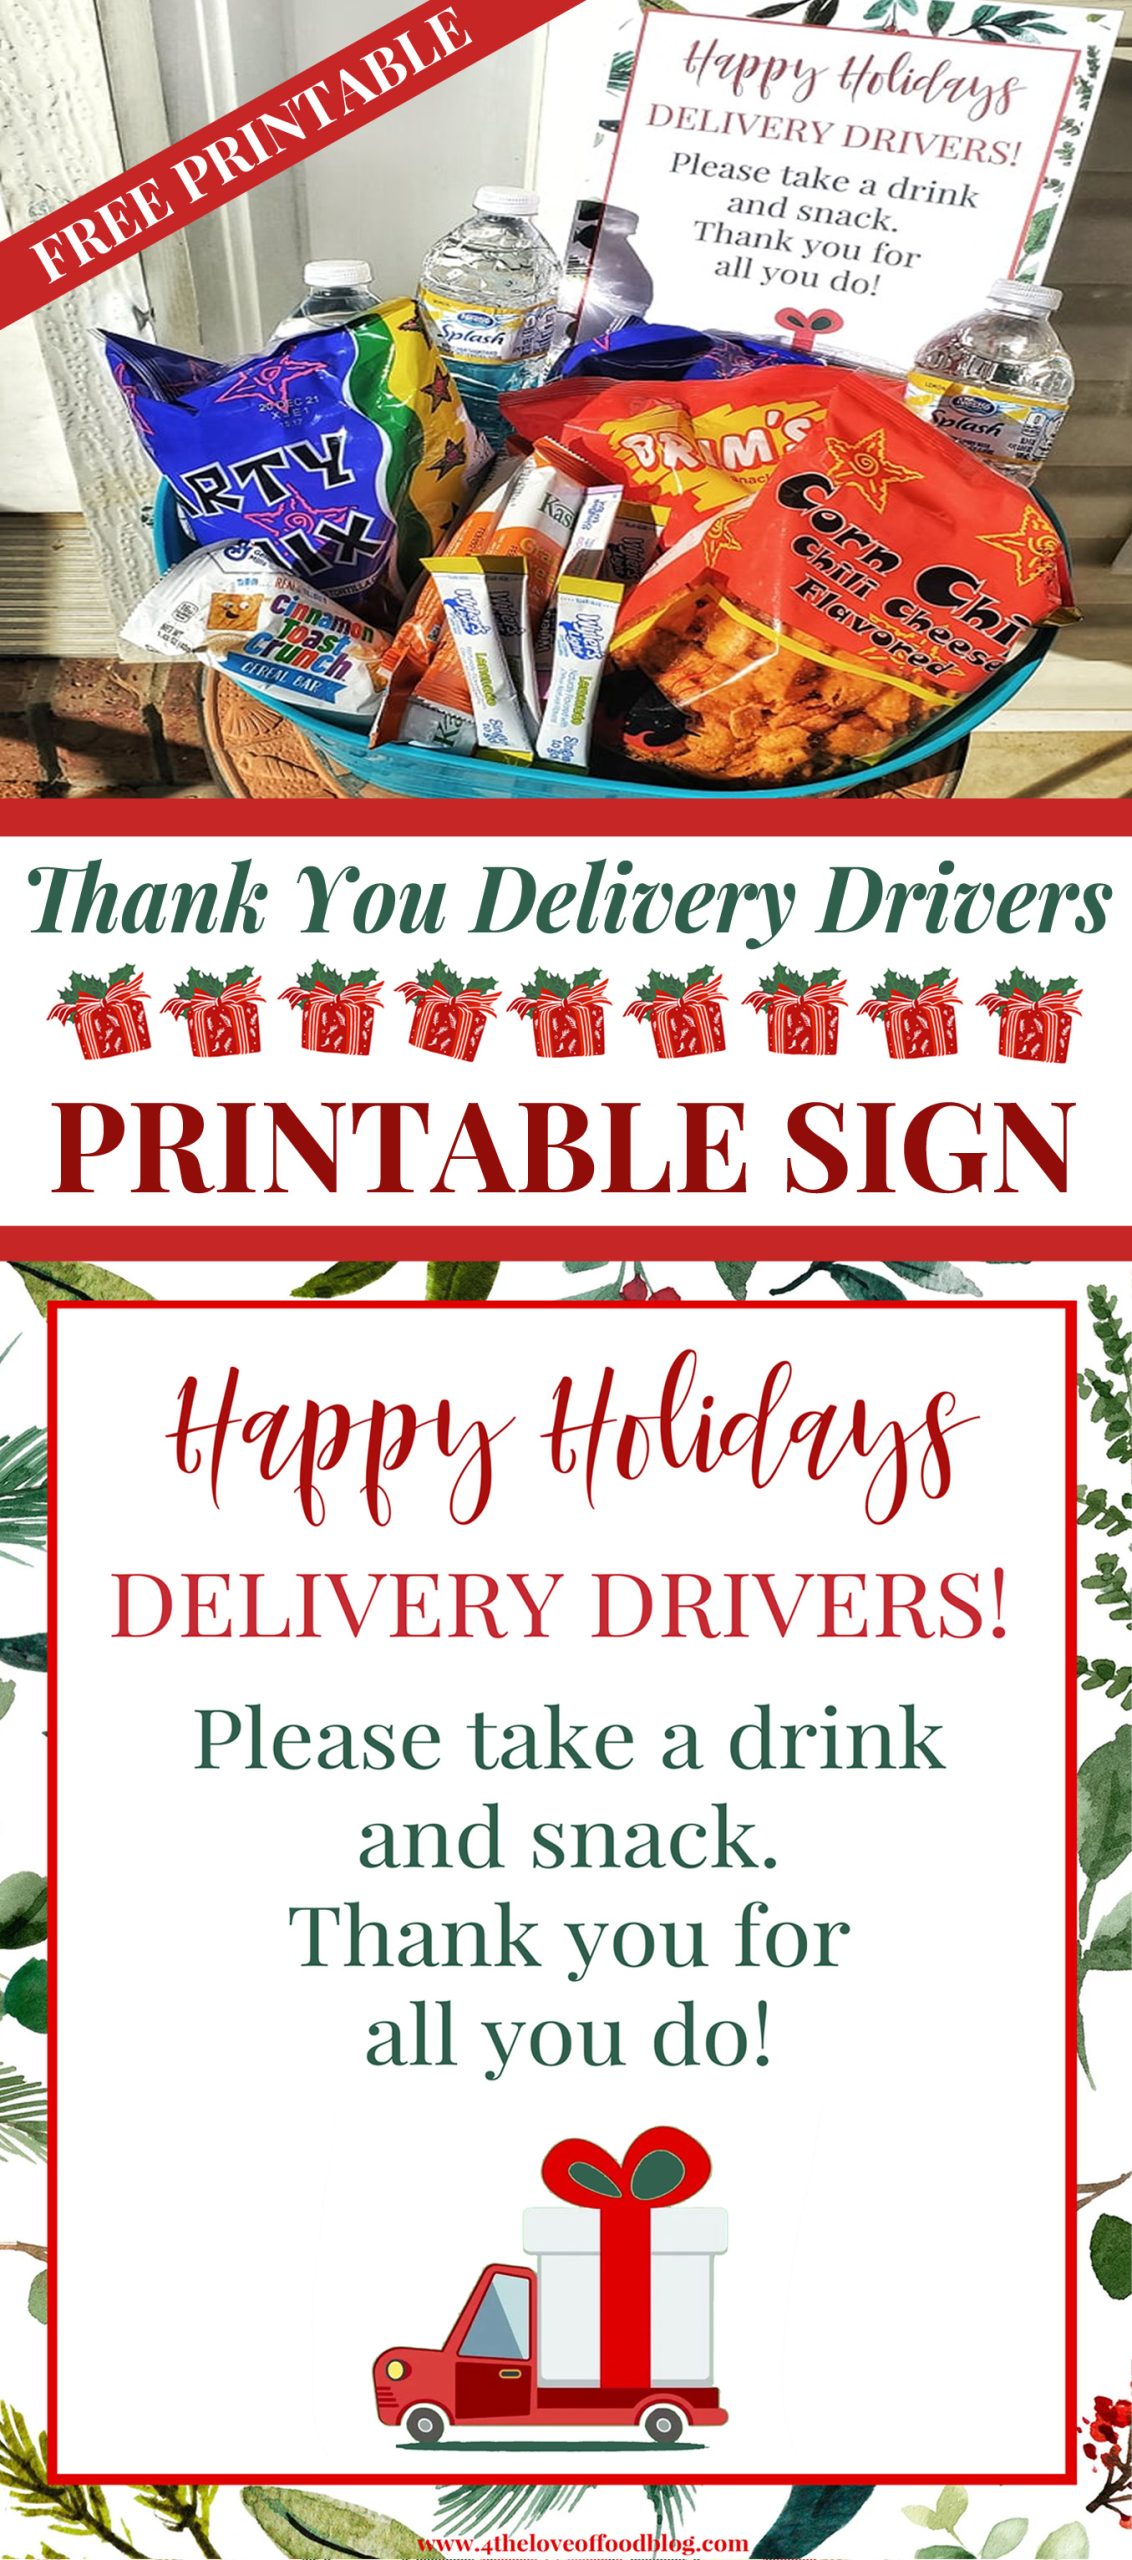 thank-you-delivery-drivers-snack-basket-and-printable-sign-for-the-love-of-food